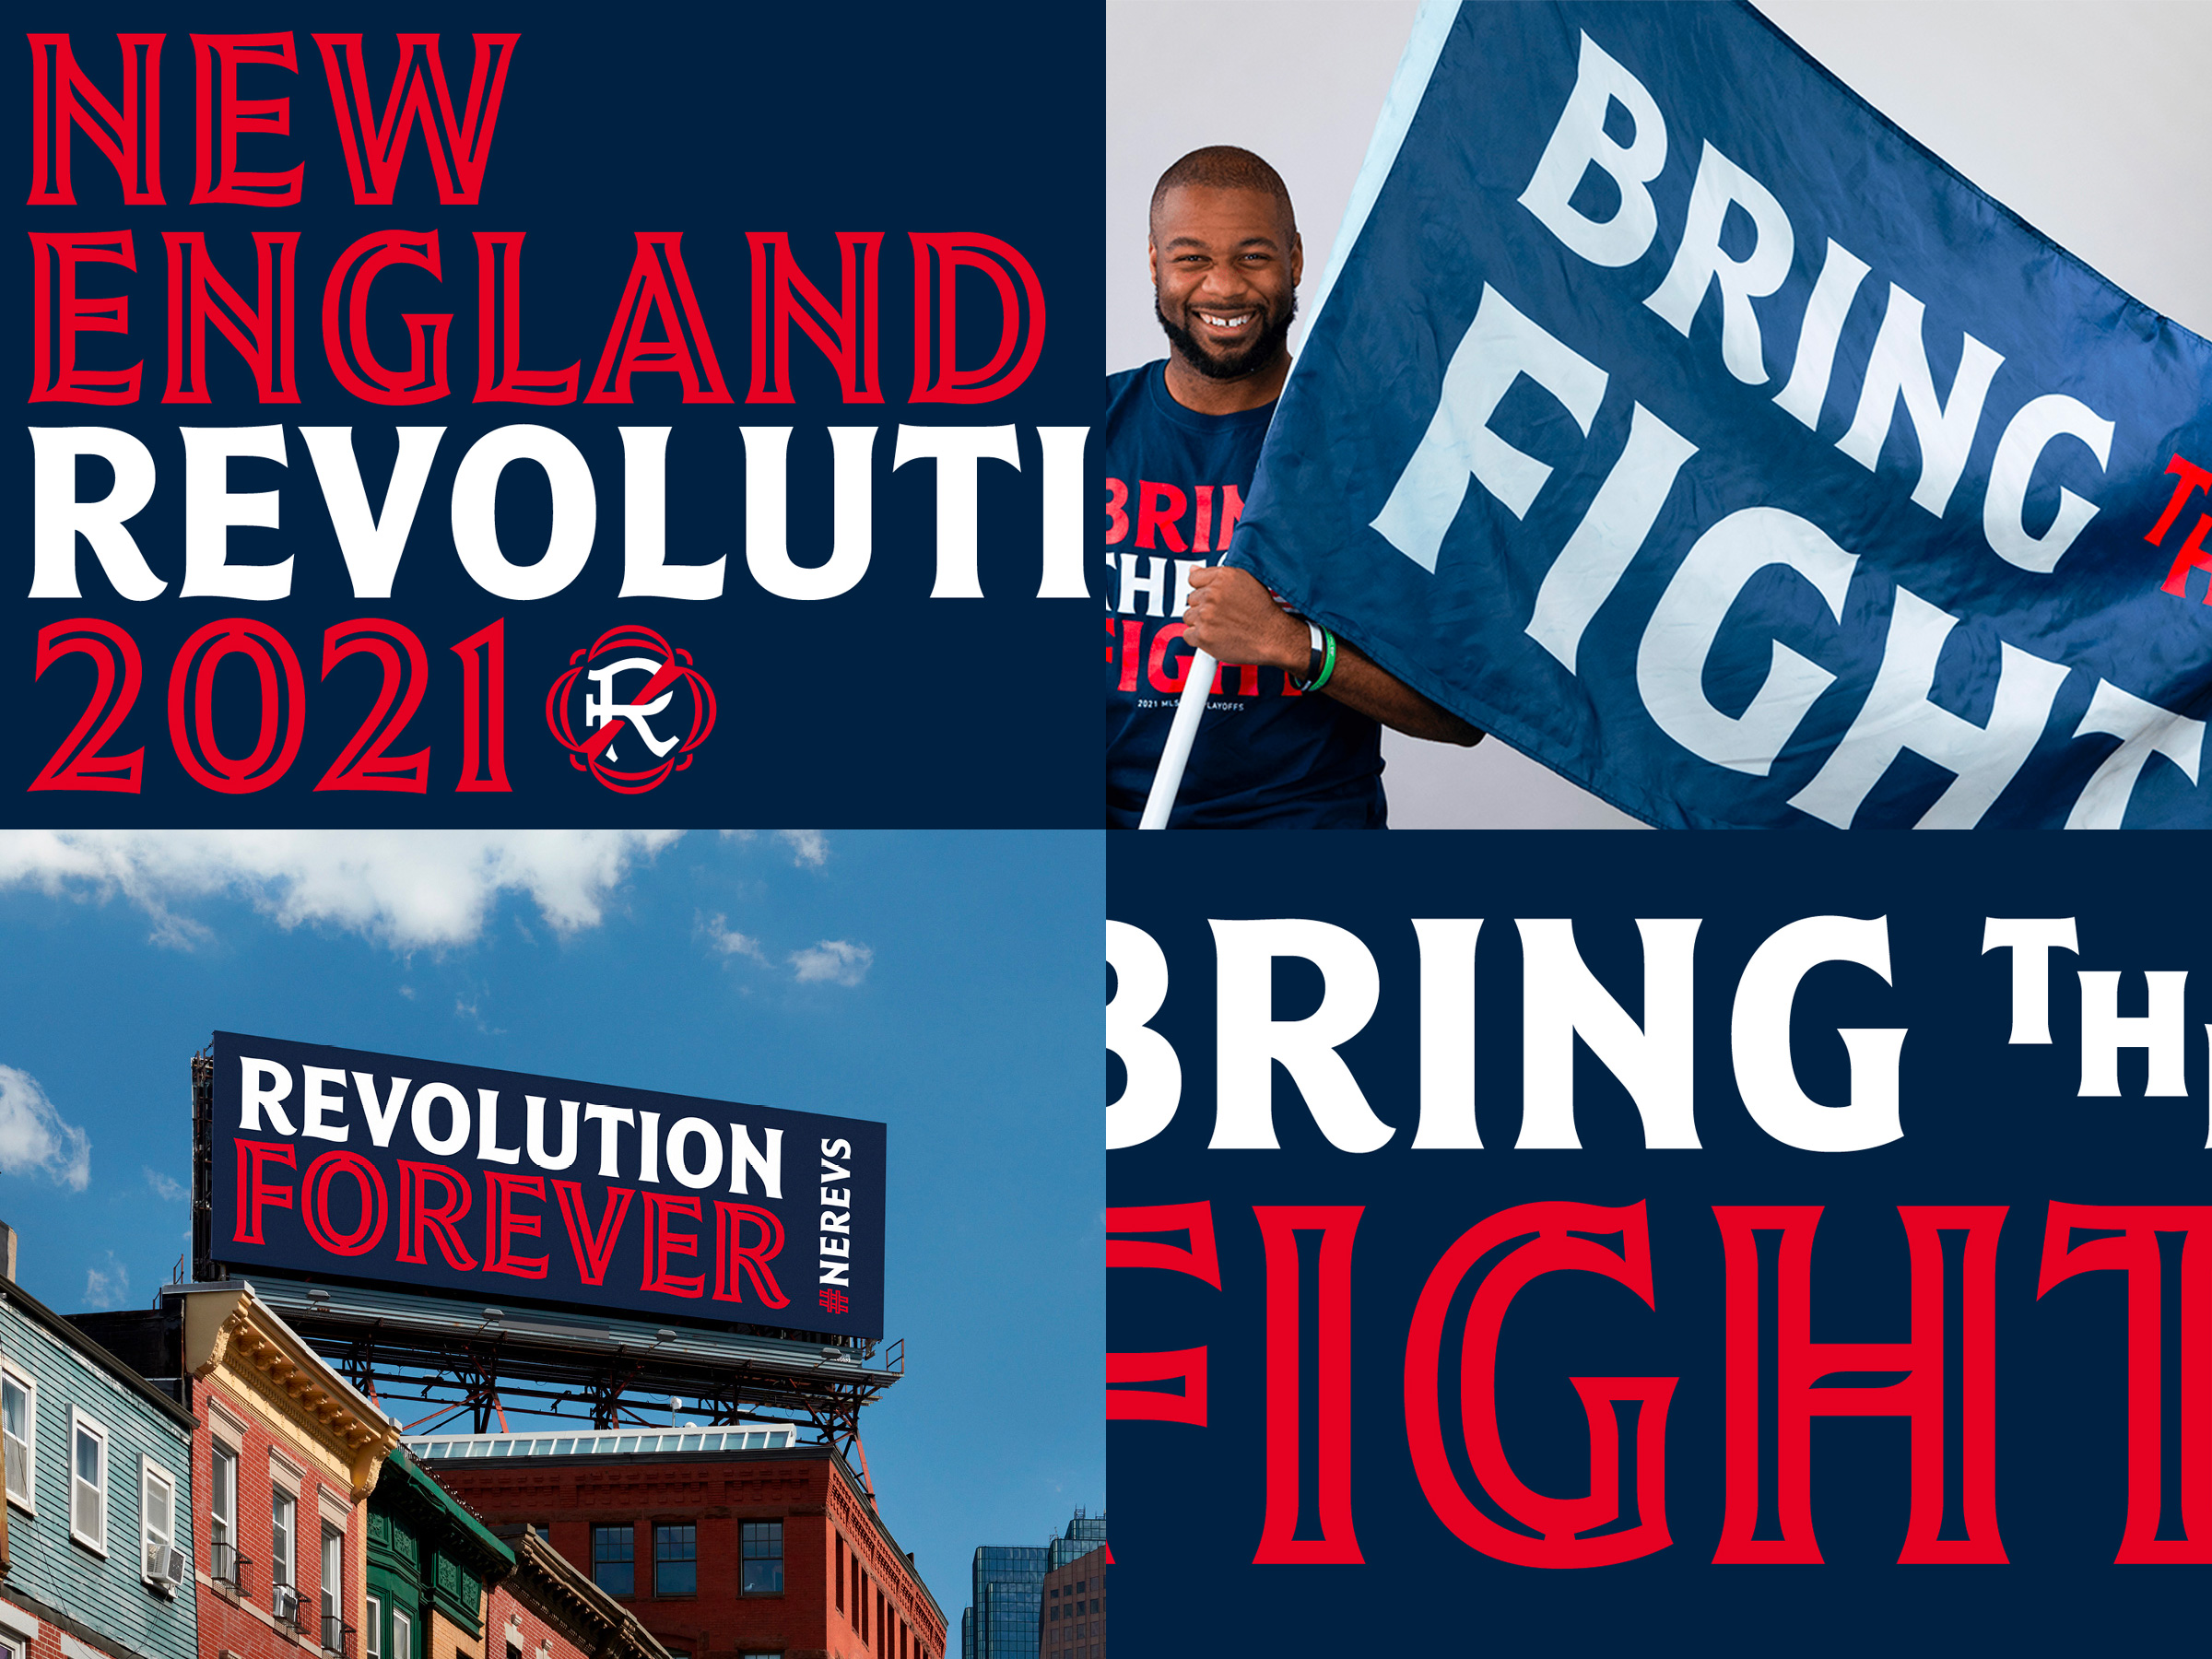 Proprietary type for New England Revolution by Jones Knowles Ritchie